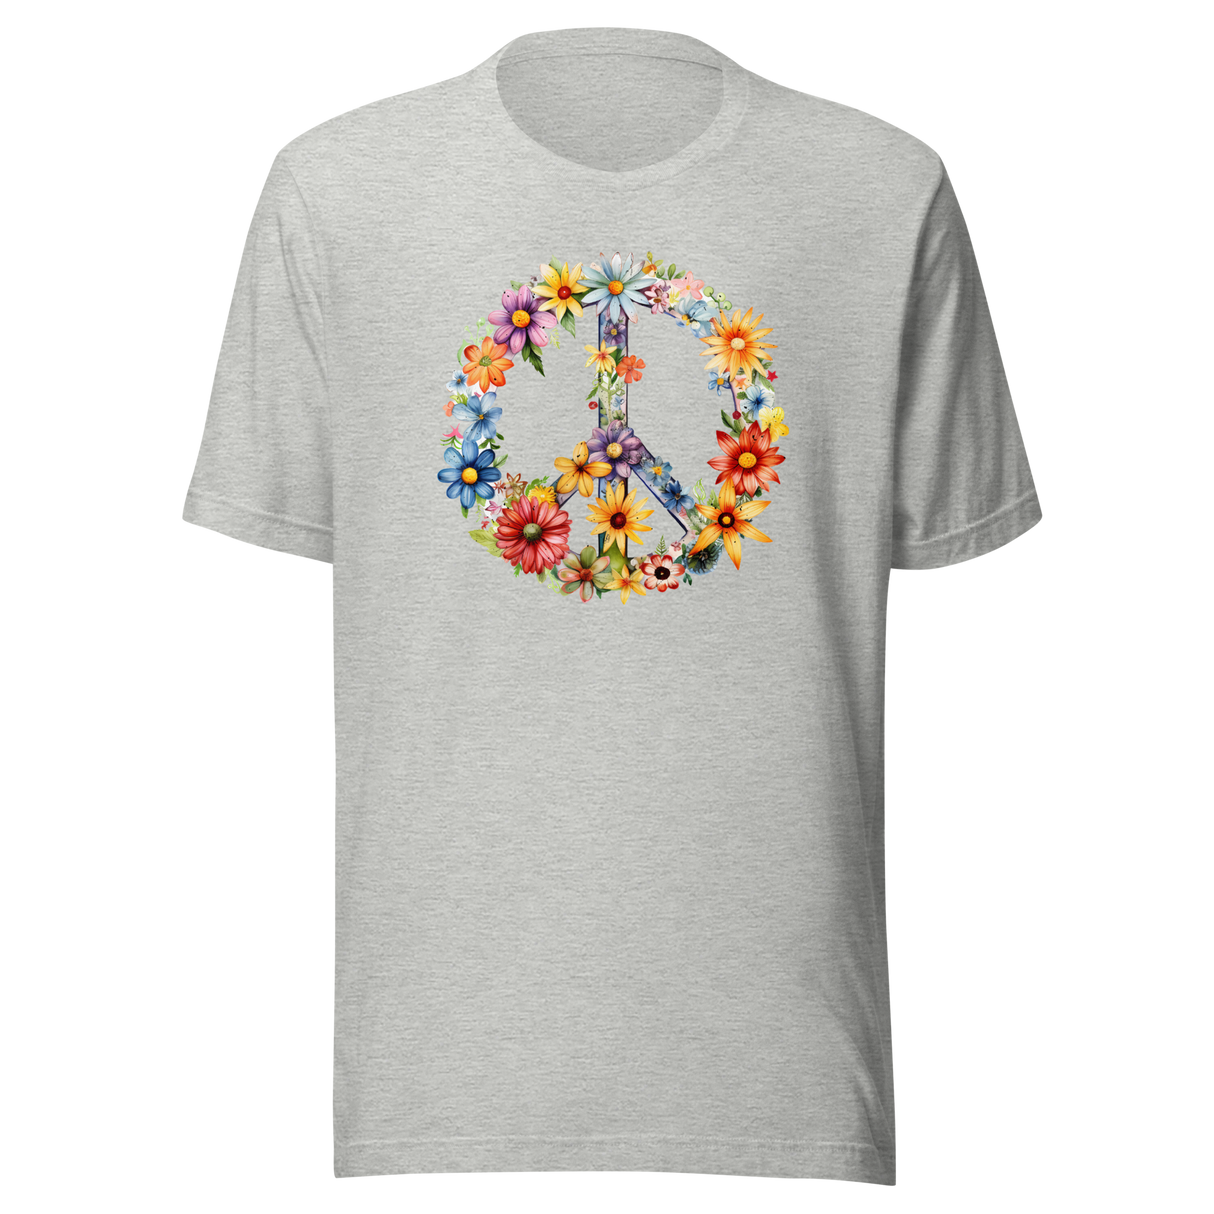 Peace Sign With Flowers - Flowers-Life Tee - Floral T-Shirt - Peace Tee - Feminine T-Shirt - Nature Tee